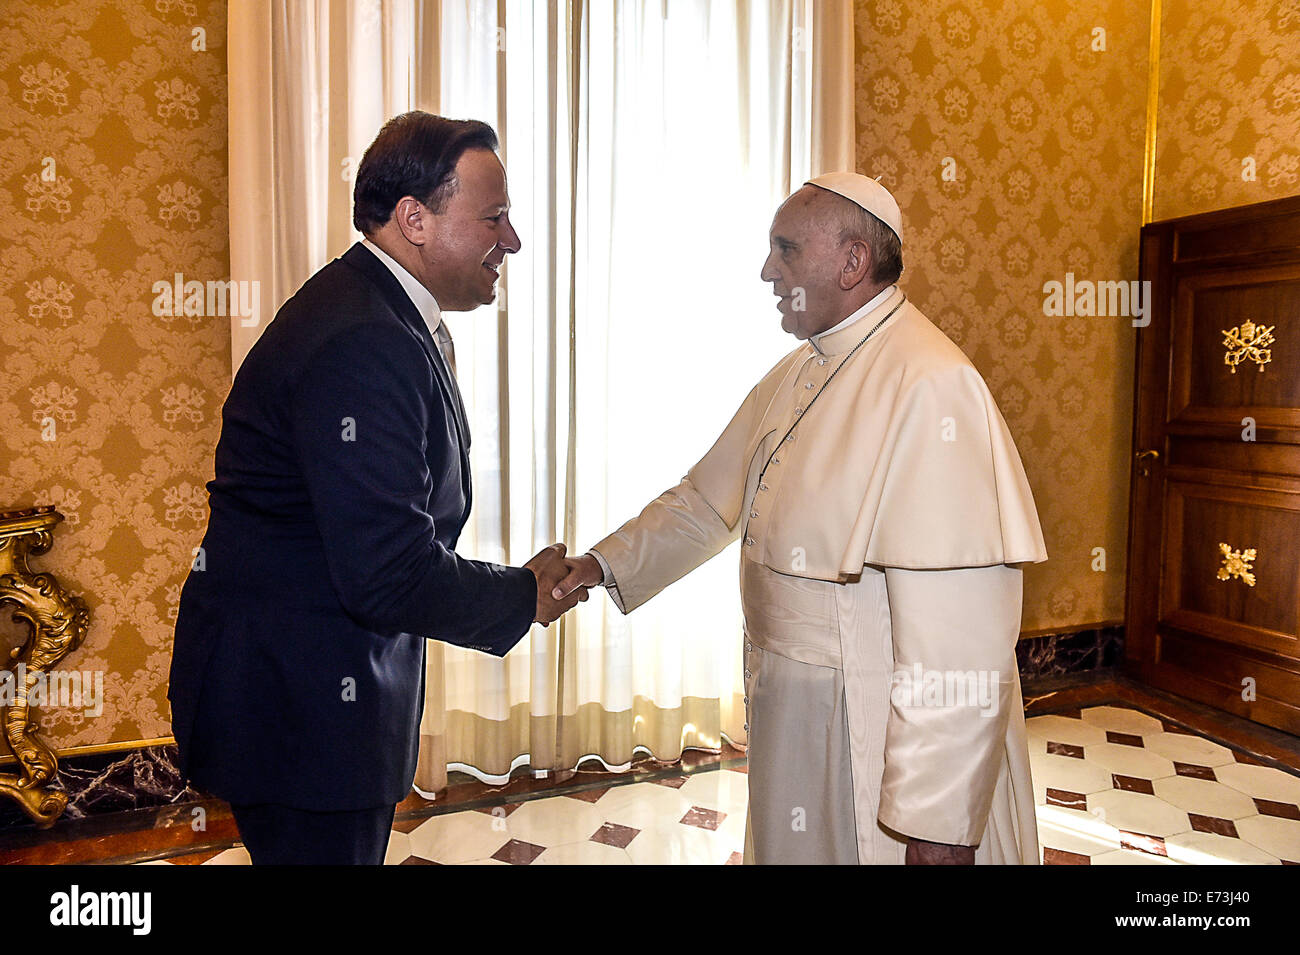 Vatican City 05th September 2014 Pope Francis meets with the President of the Republic of Panama, S.E. Mr. Juan Carlos VARELA Credit:  Realy Easy Star/Alamy Live News Stock Photo